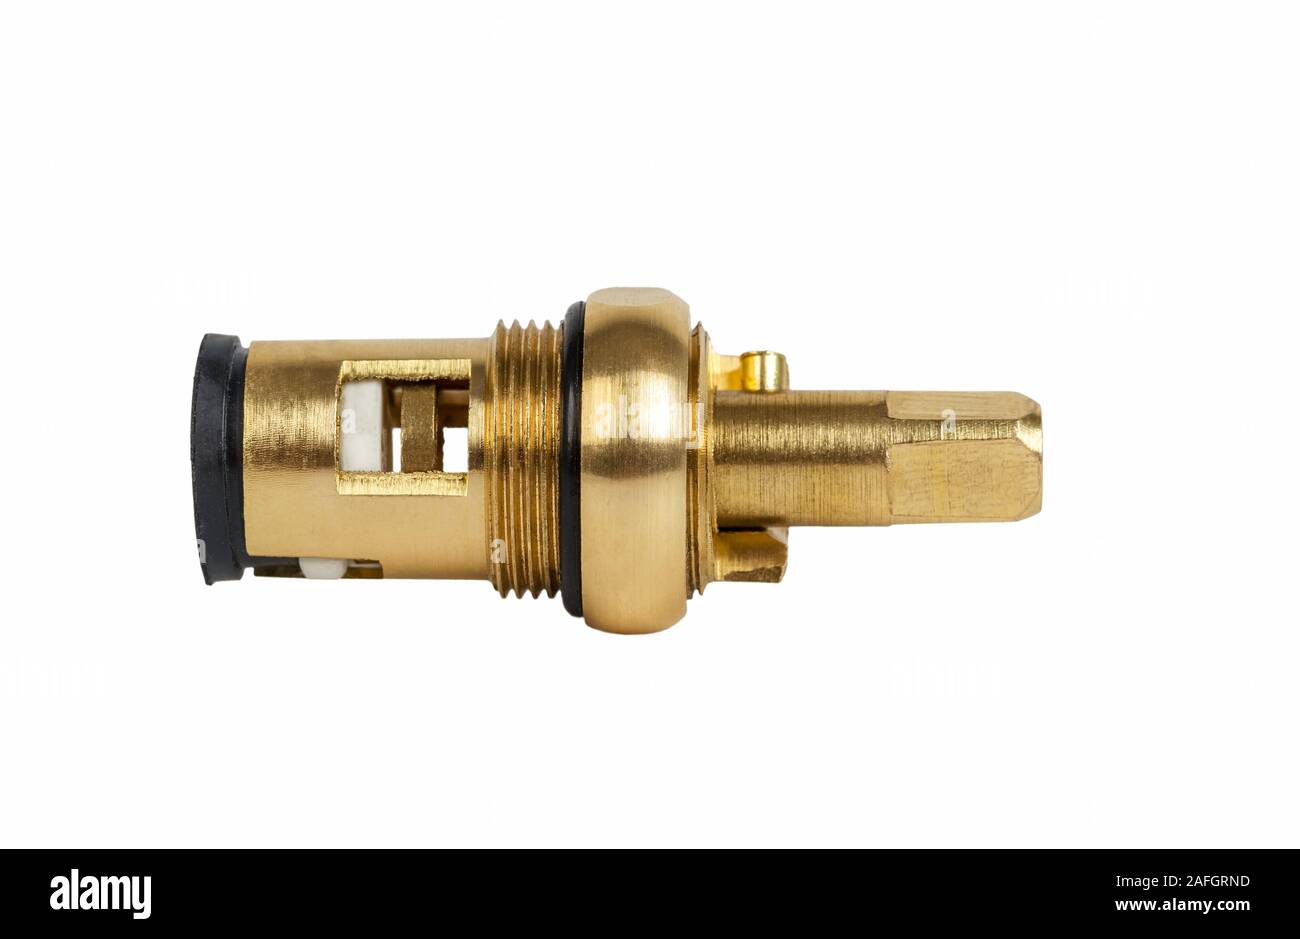 Brass faucet parts cartridge for water valve isolated on white background Stock Photo